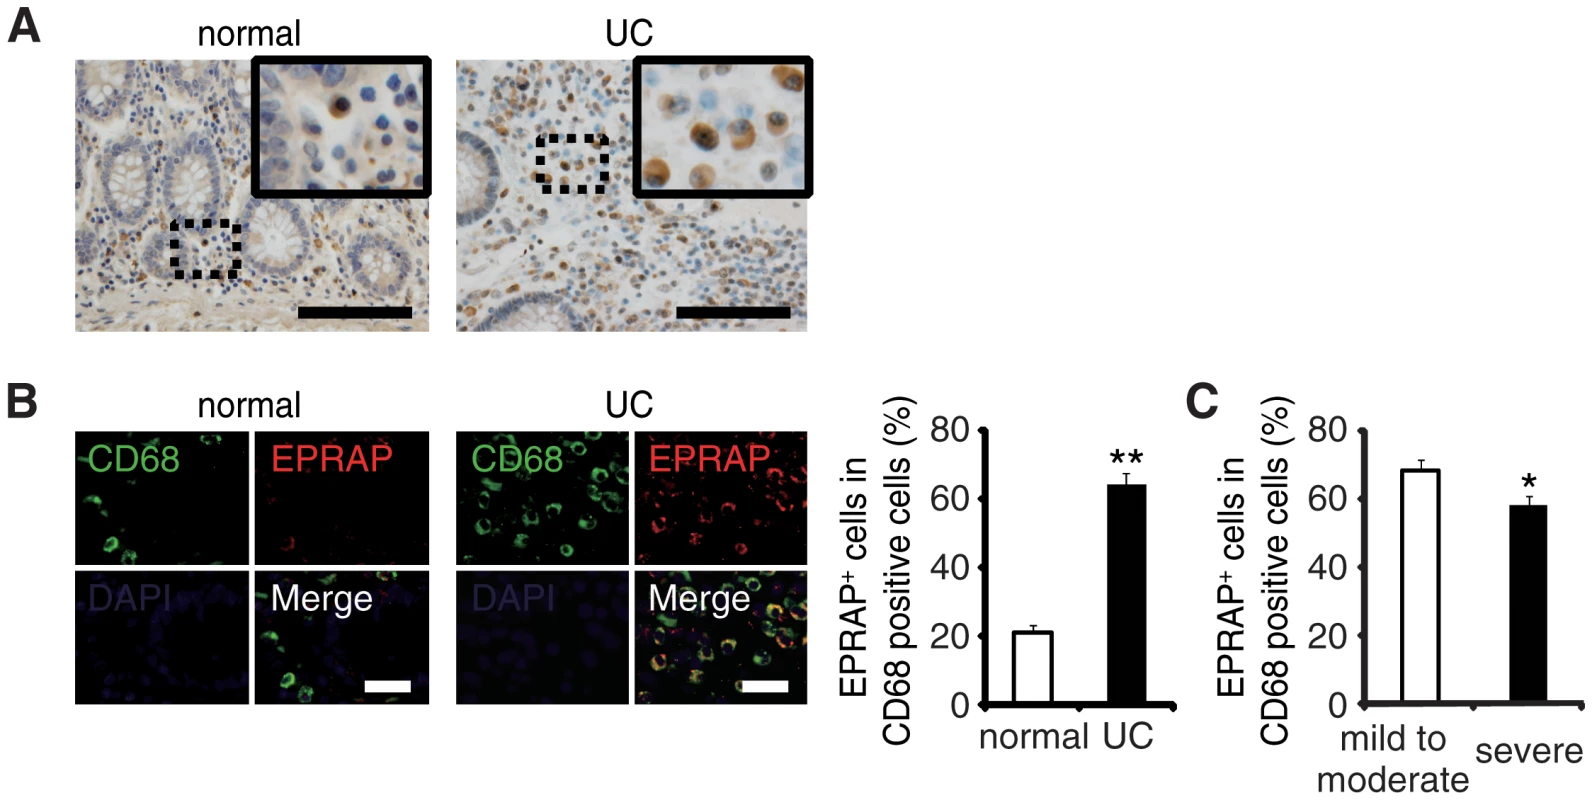 The colons of ulcerative colitis (UC) showed accumulation of EPRAP-positive macrophages.